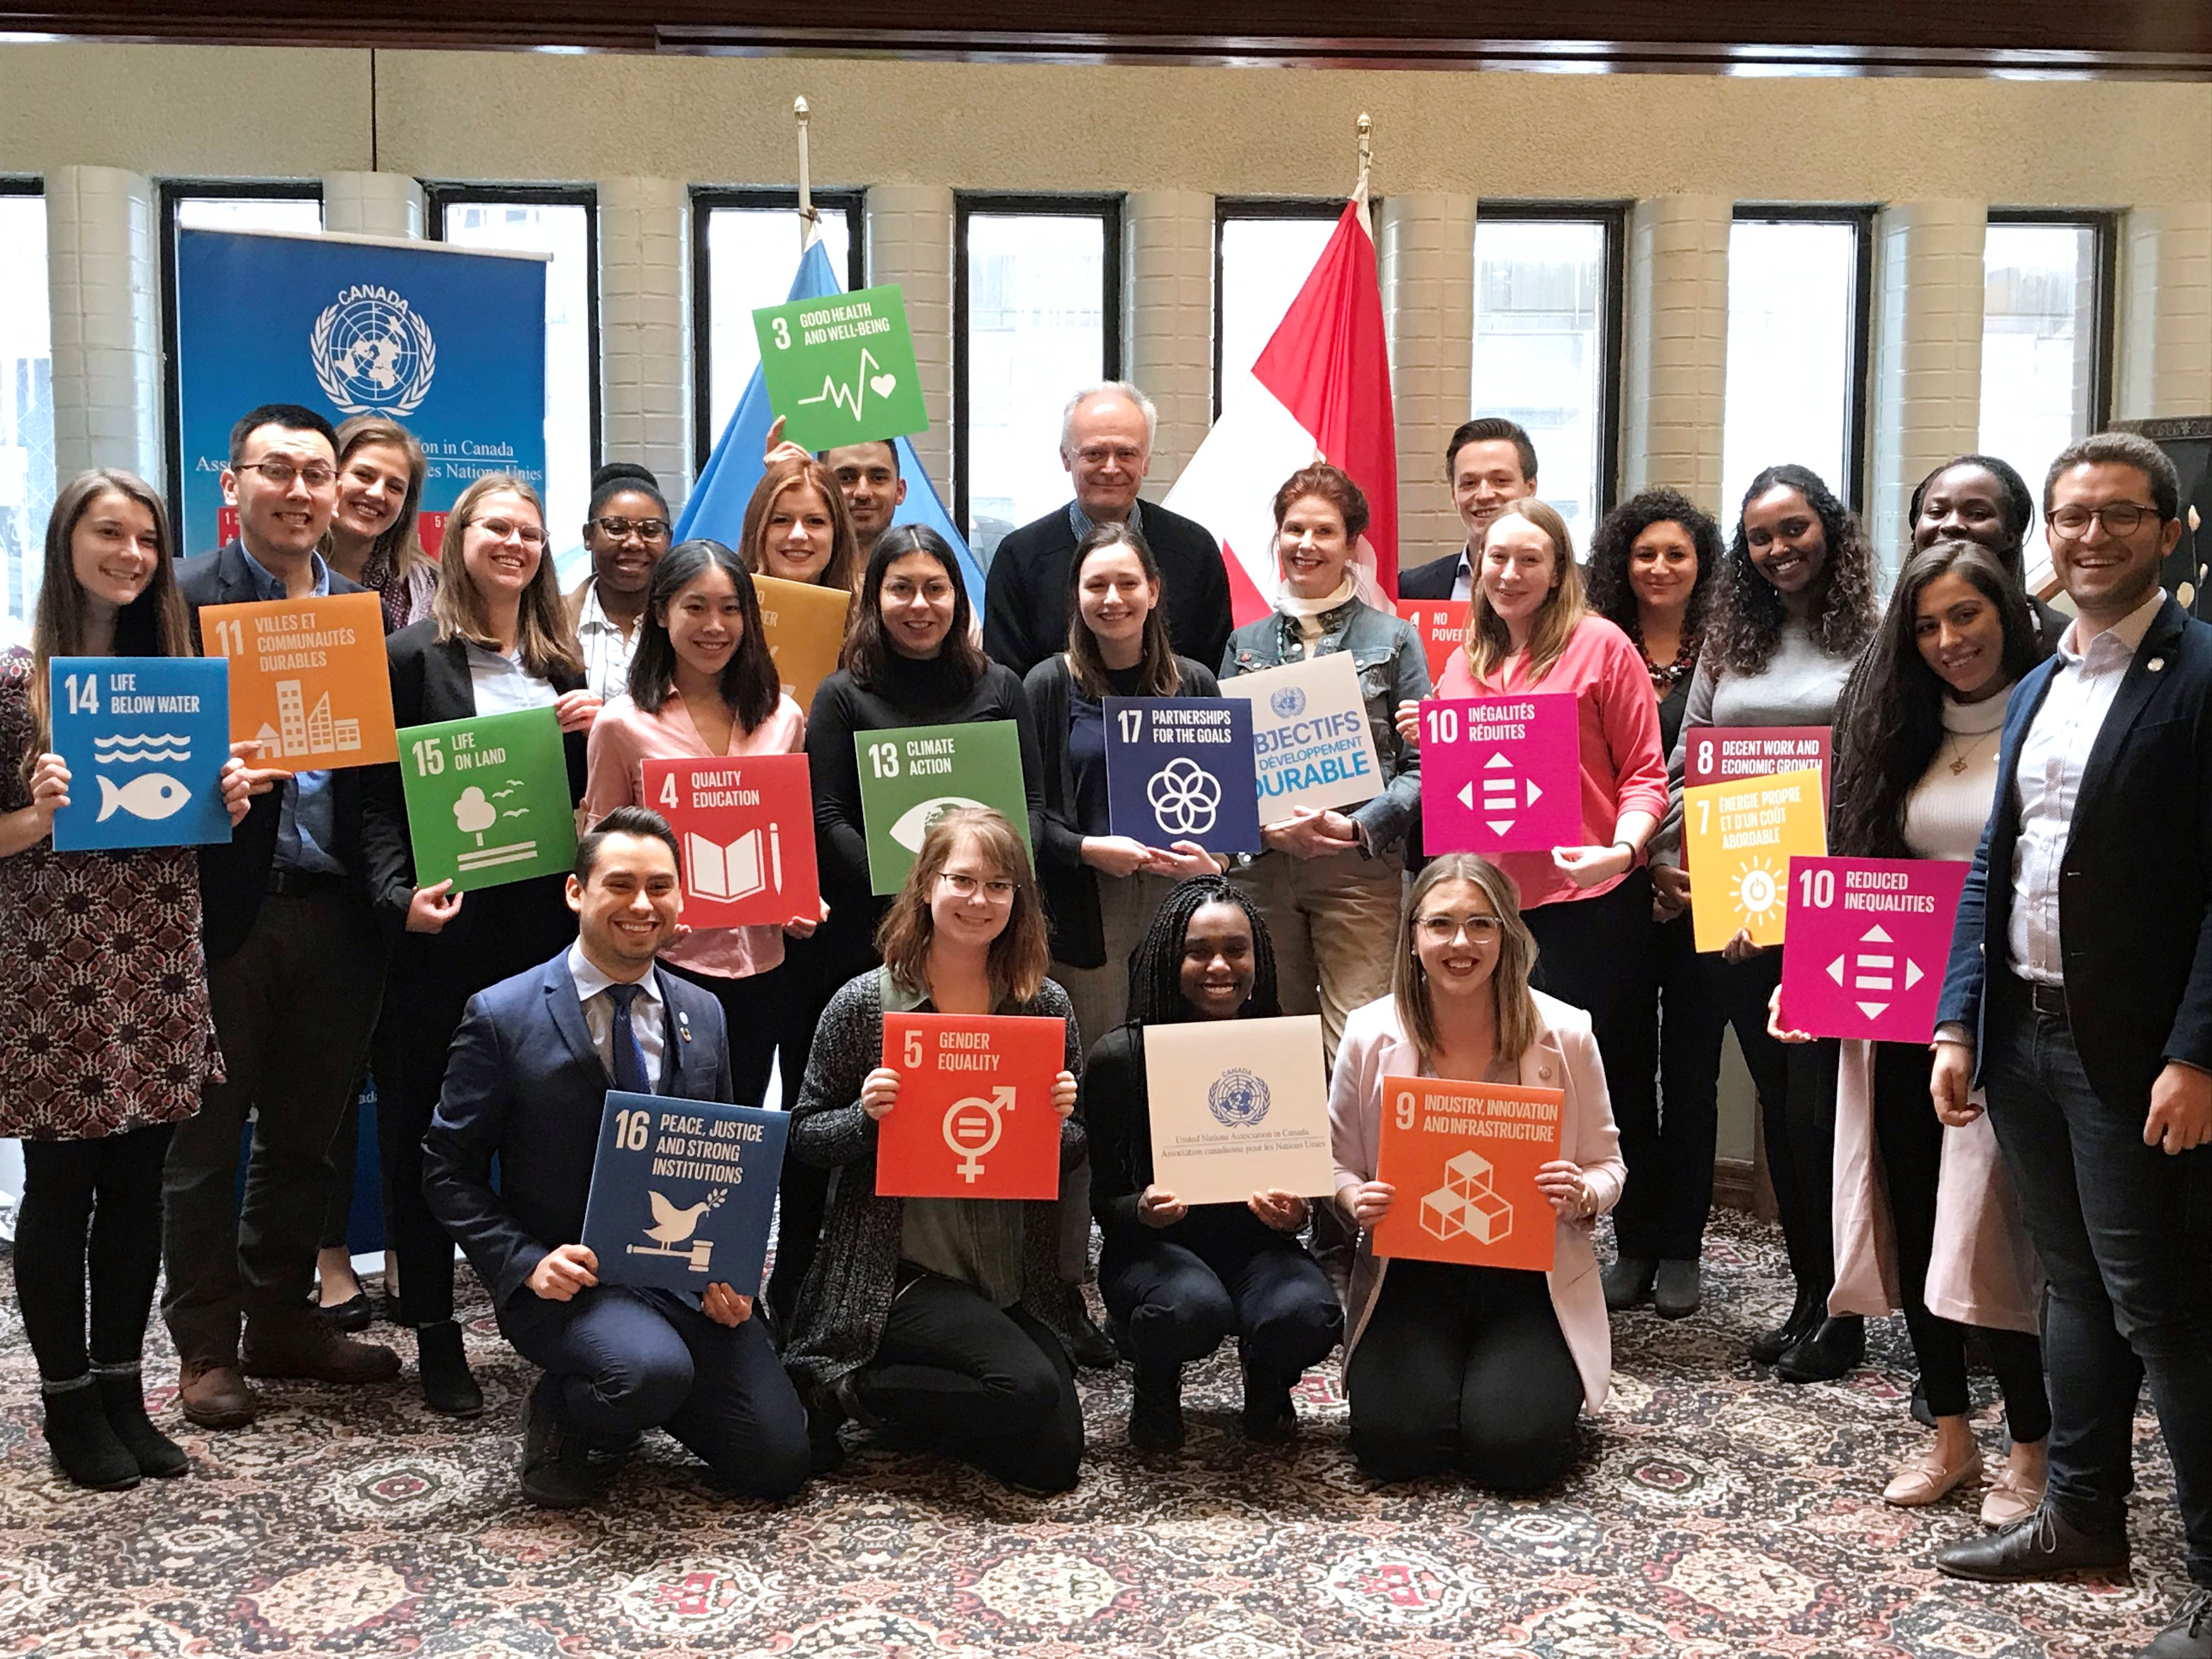 Friday, February 15 – Senator Peter Boehm meets with interns from the United Nations Association in Canada ahead of their departure on six-month internships at United Nations agencies. Senator Boehm spoke with the interns as part of a SENgage youth outreach event.